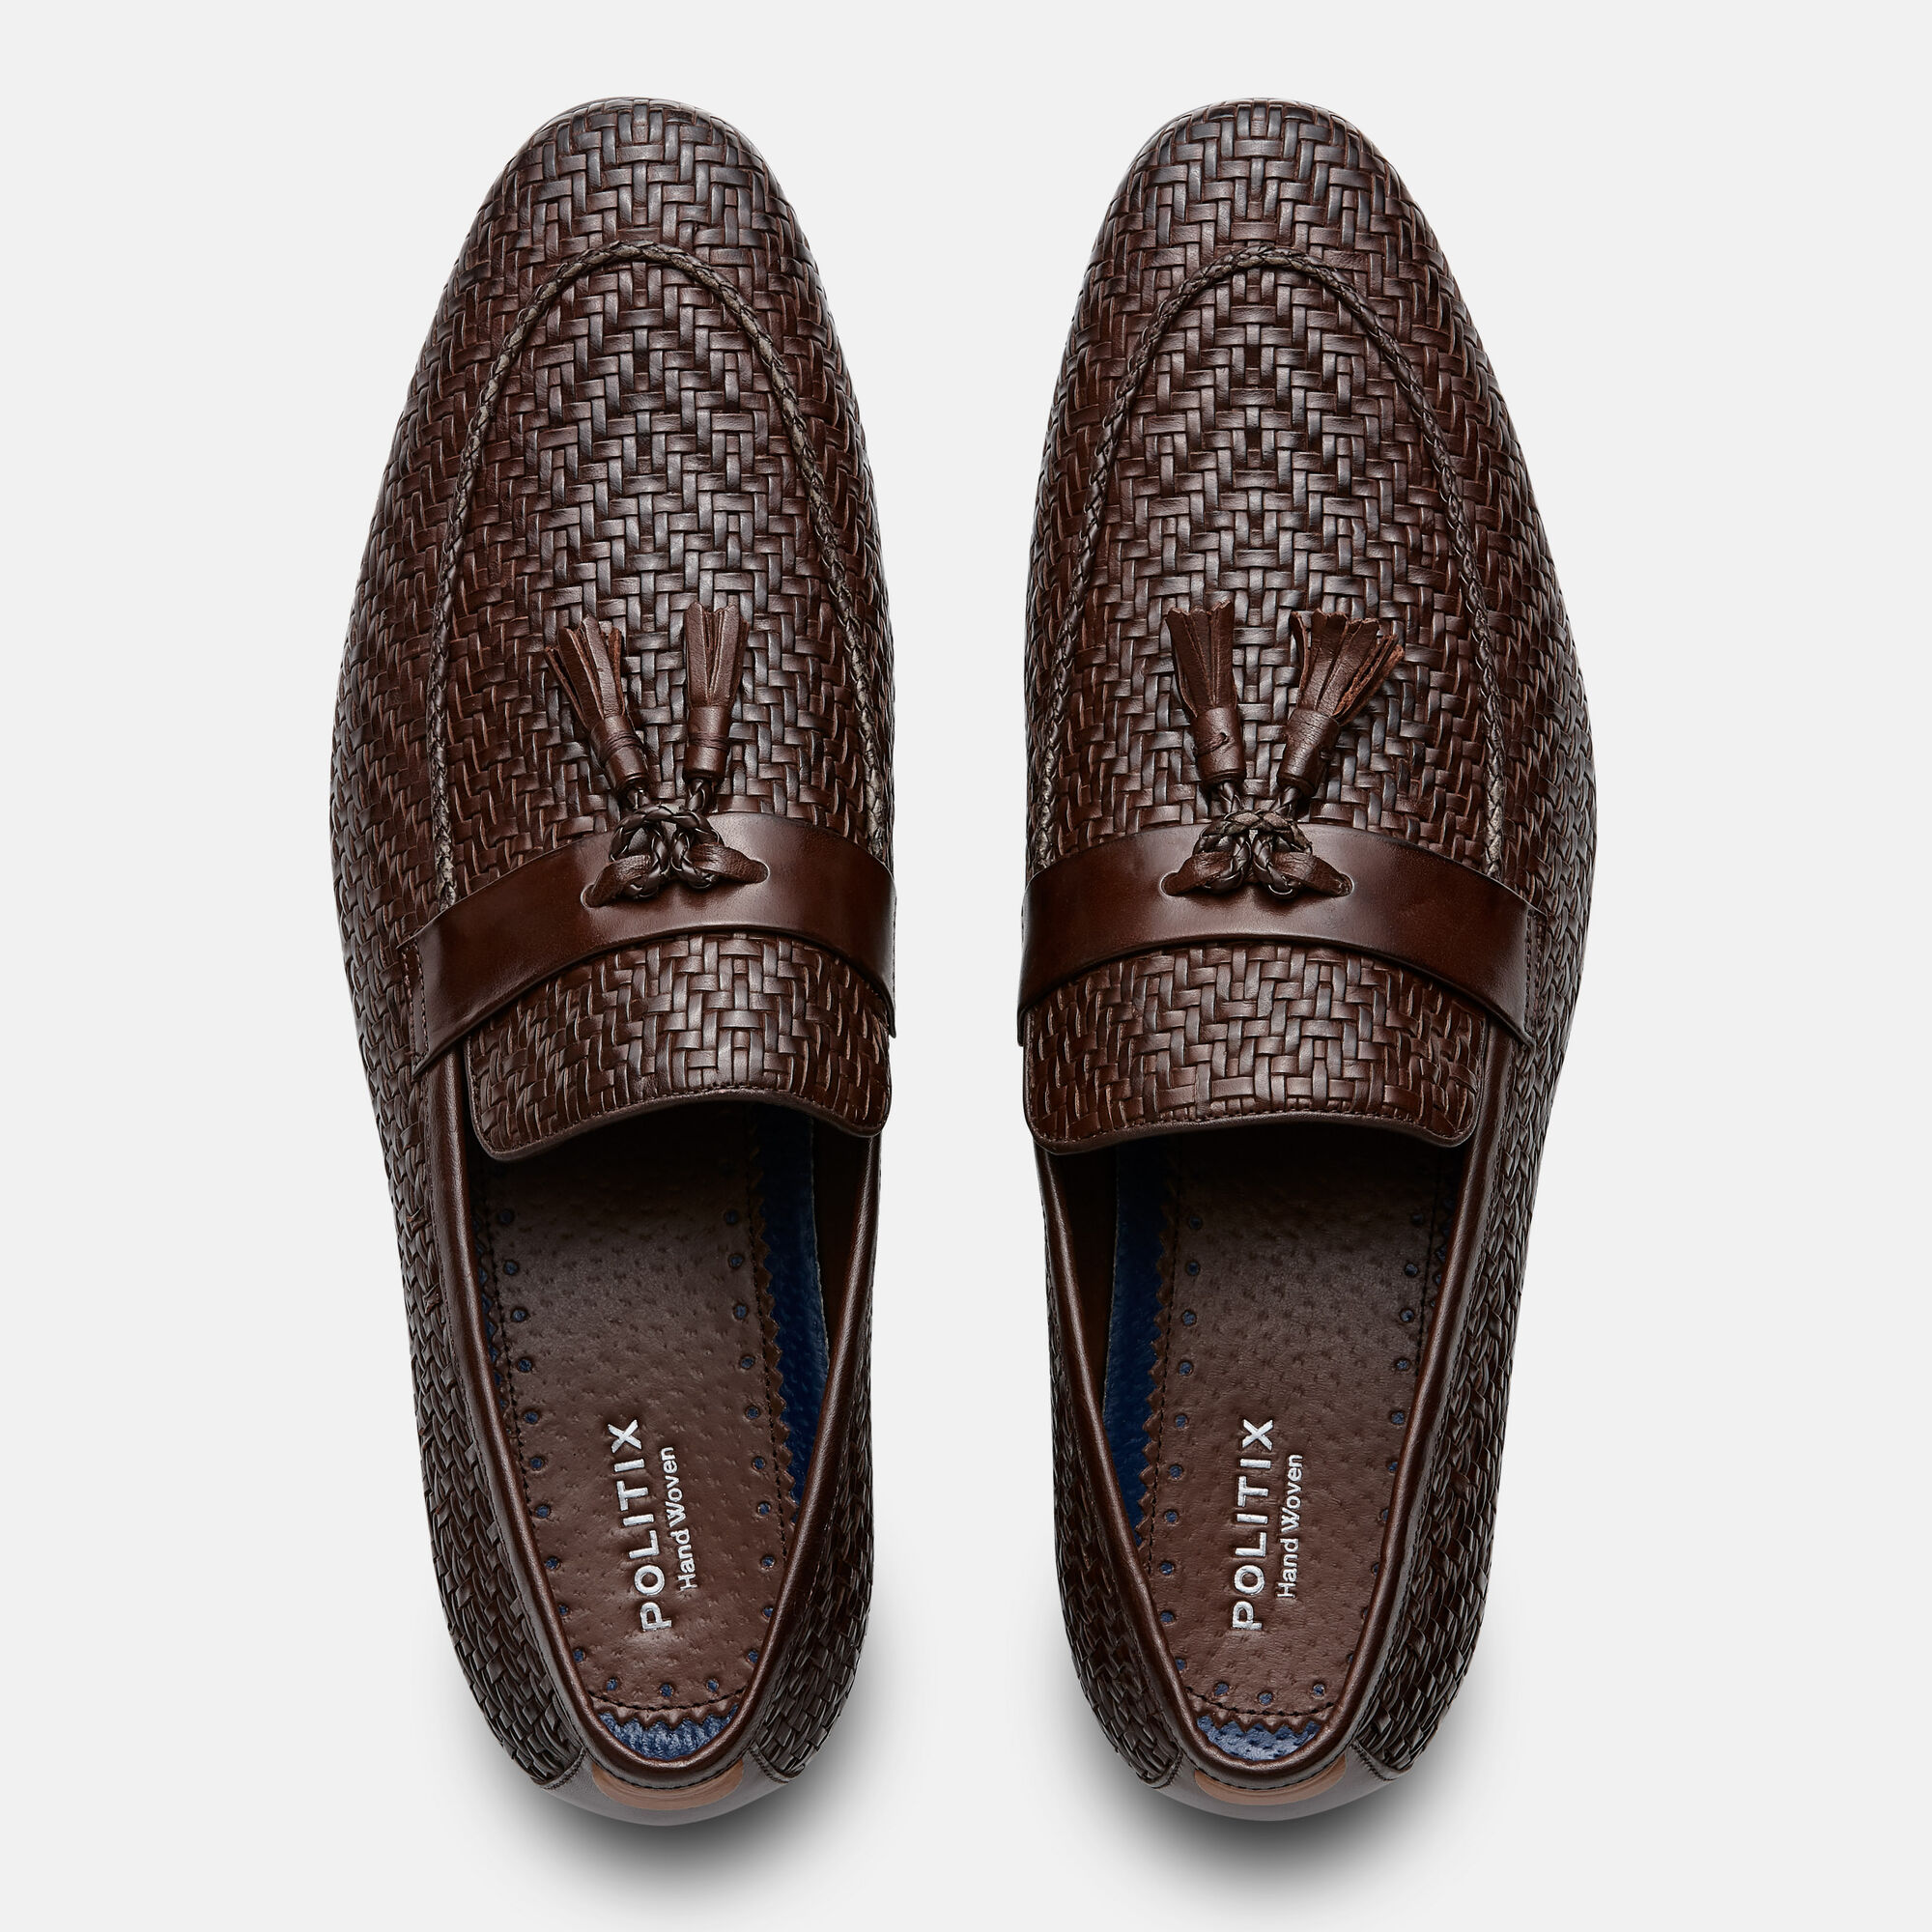 Zakkary - Brown - Slip On Leather Loafers Hand Woven | shoes | Politix